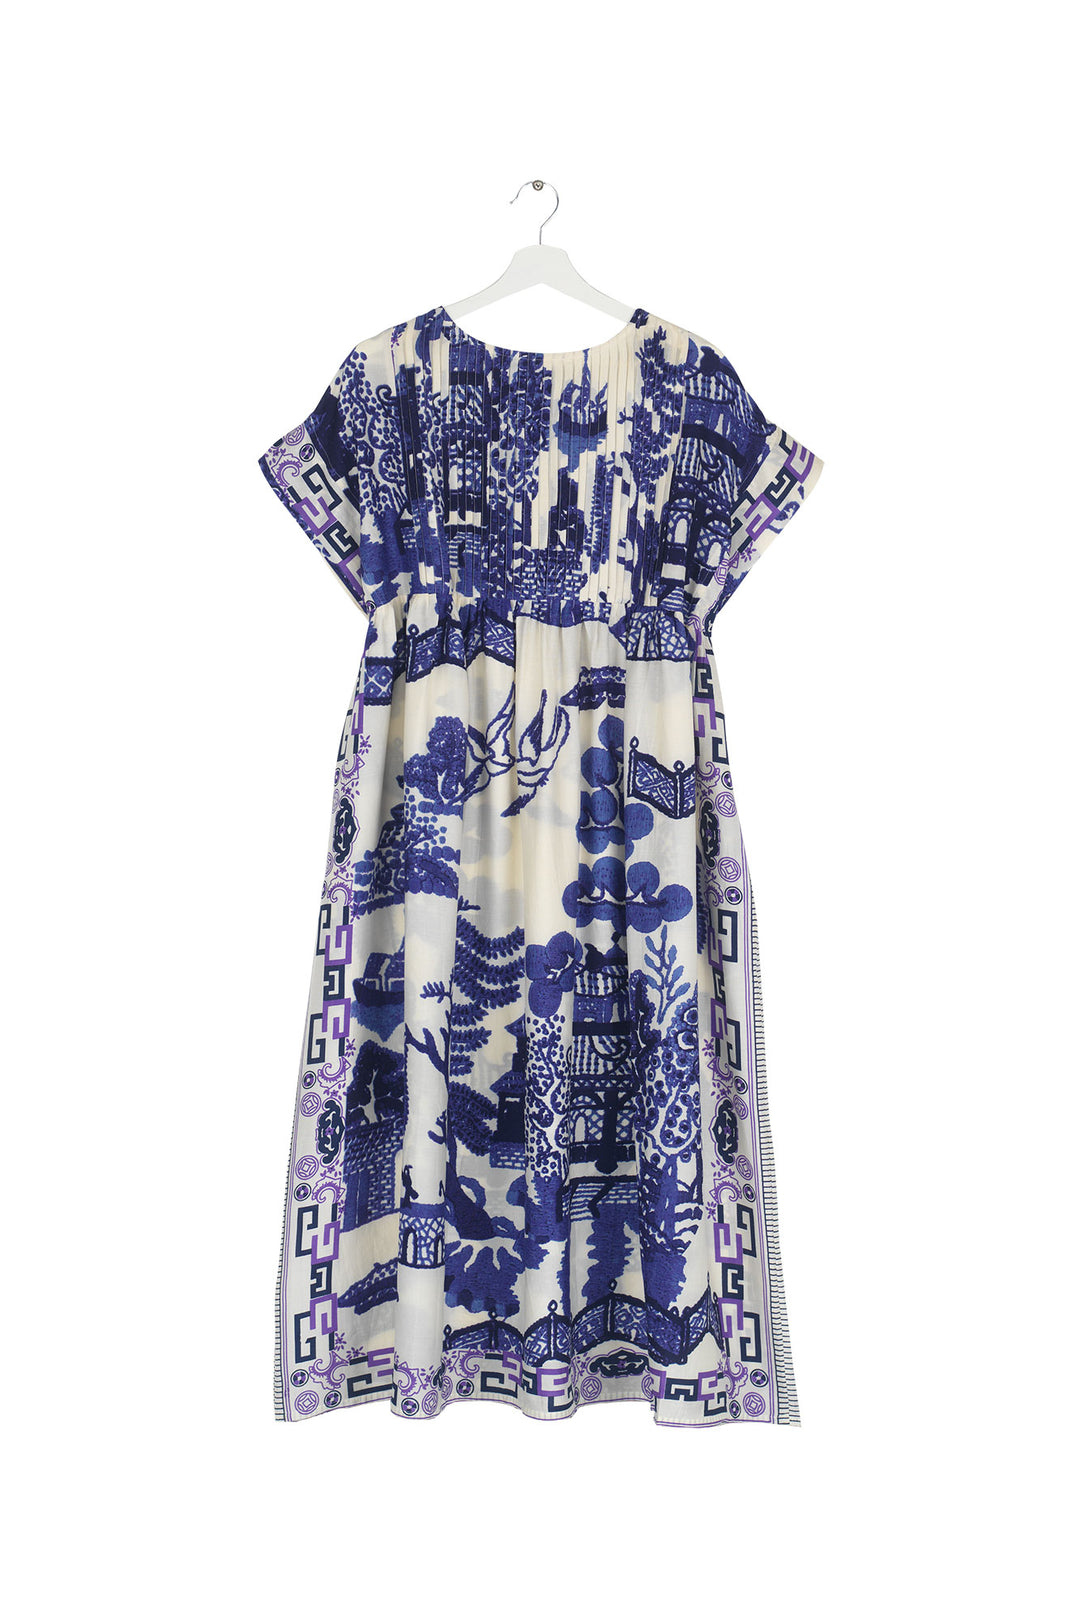 Women's short sleeve pleated dress in blue and white giant willow print by One Hundred Stars